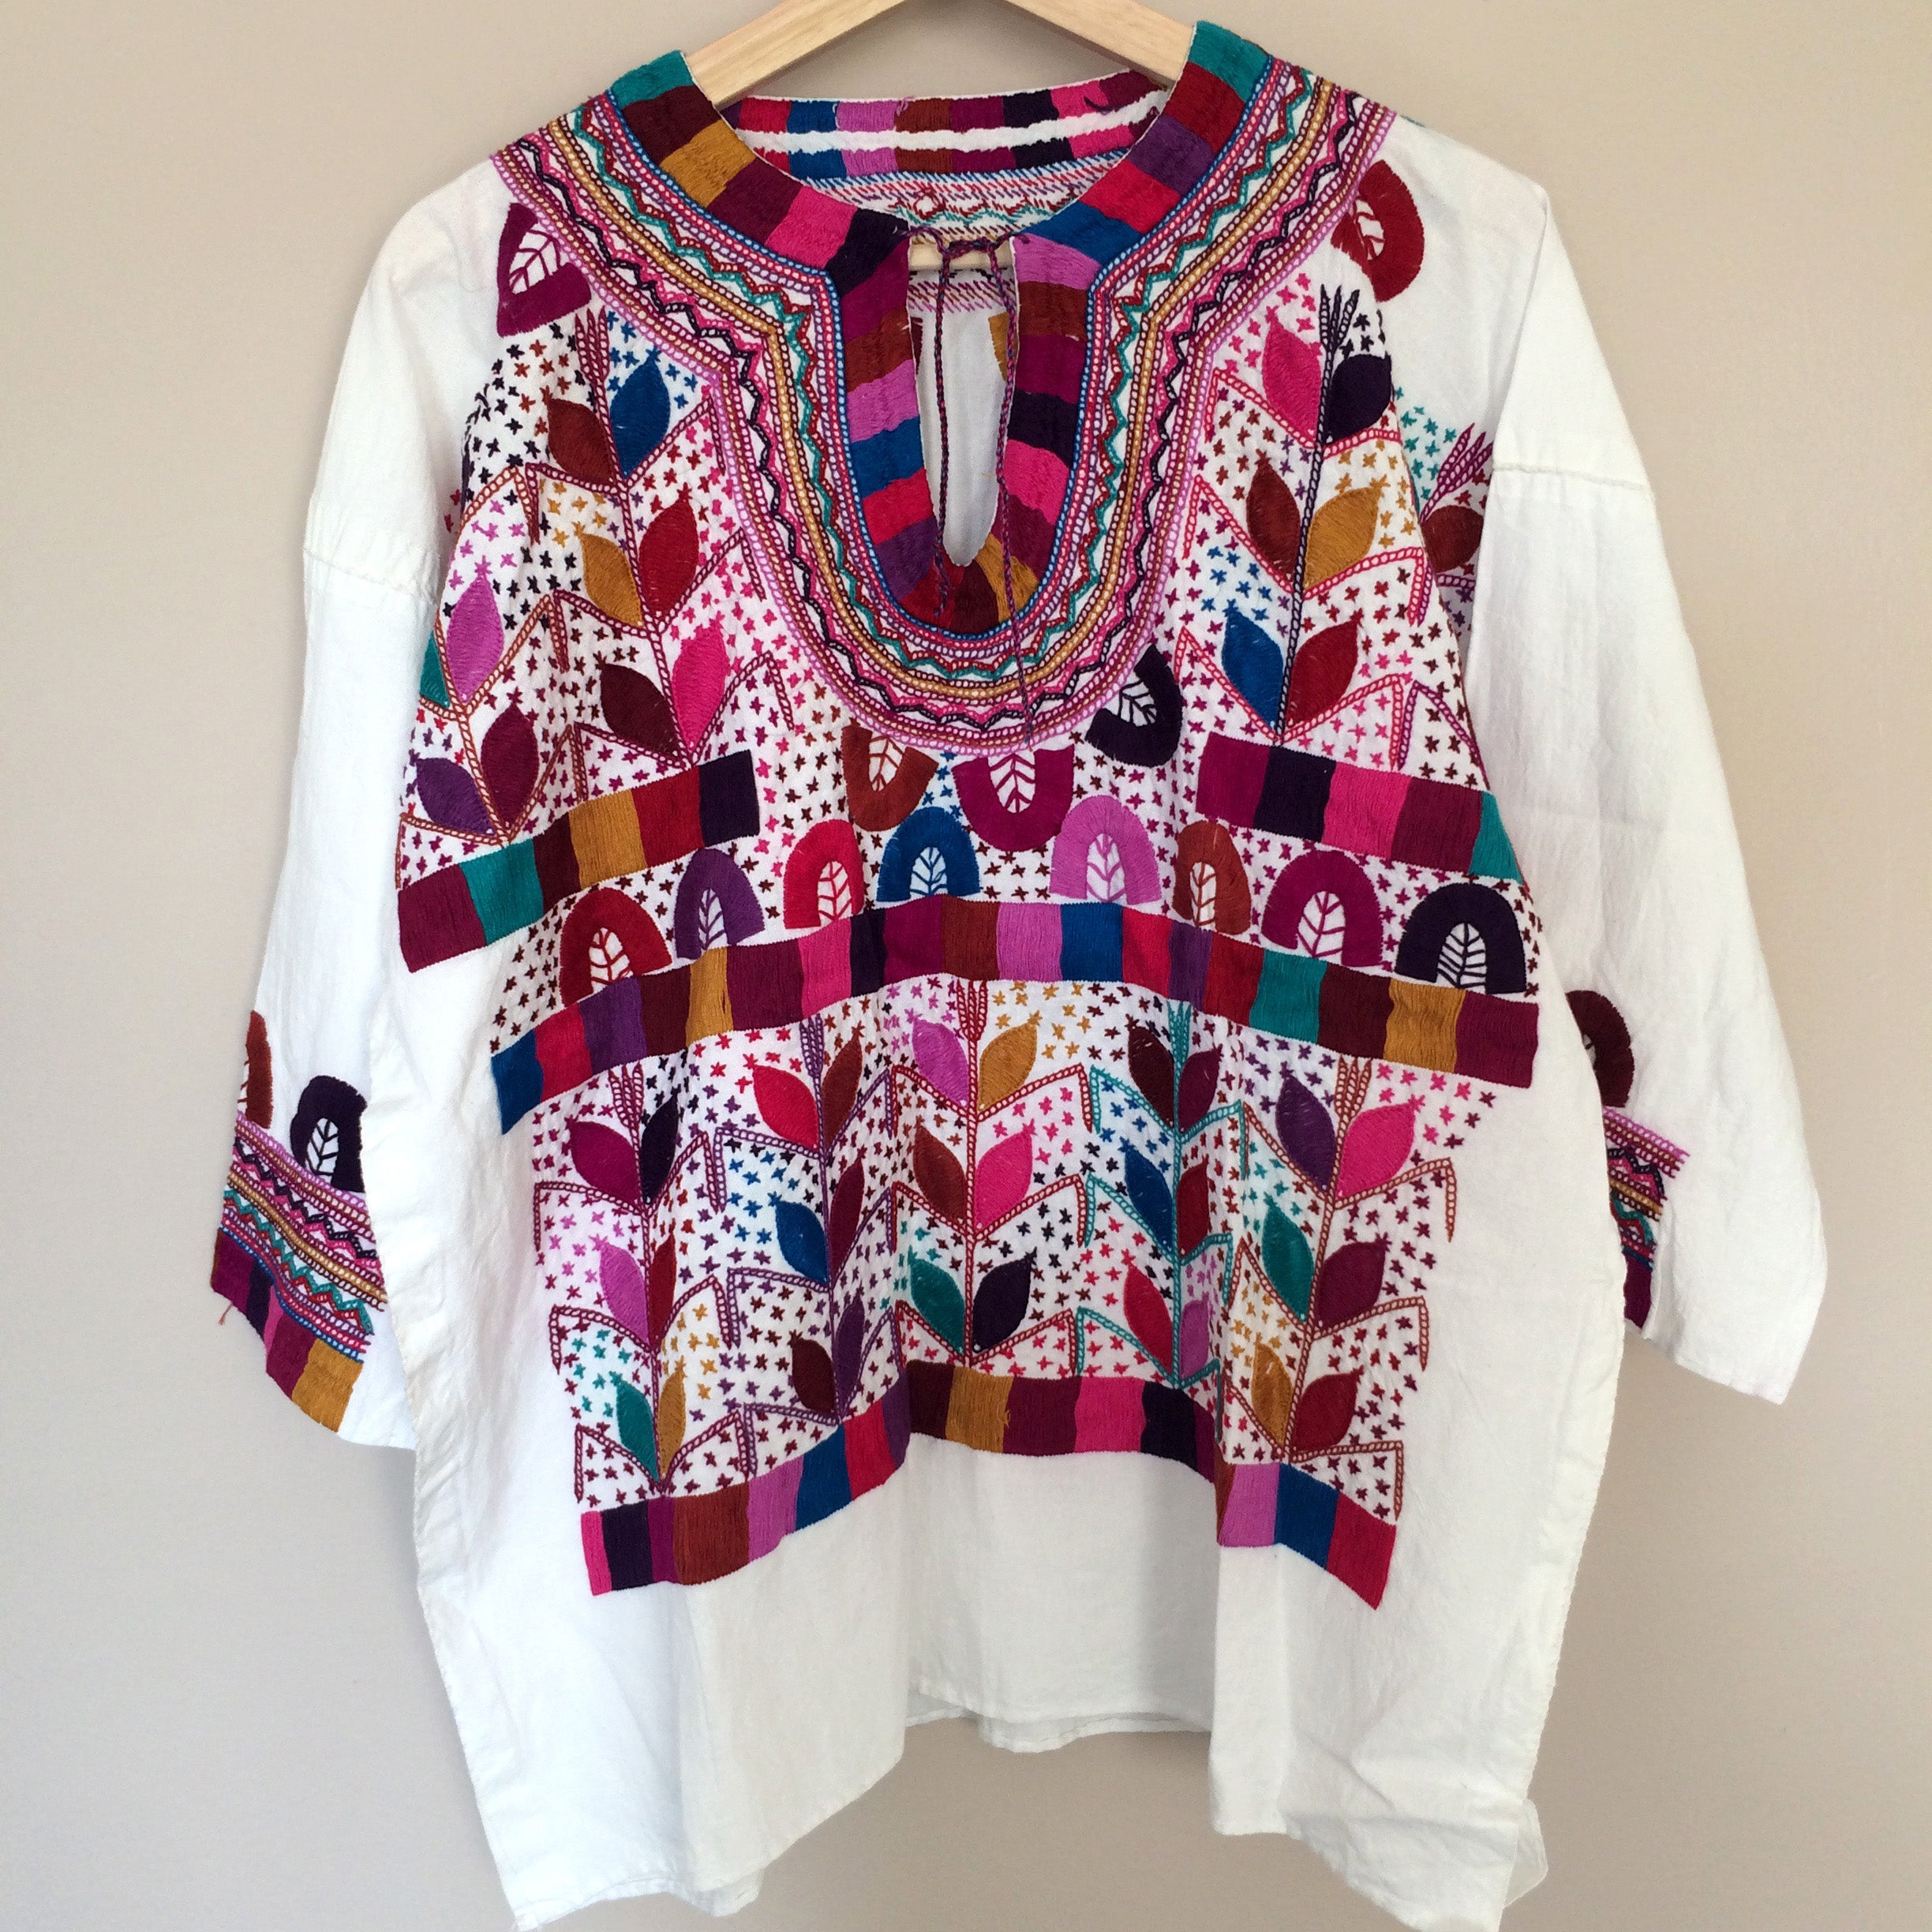 Mexican Embroidered Shirt Handmade in Chiapas | eBay